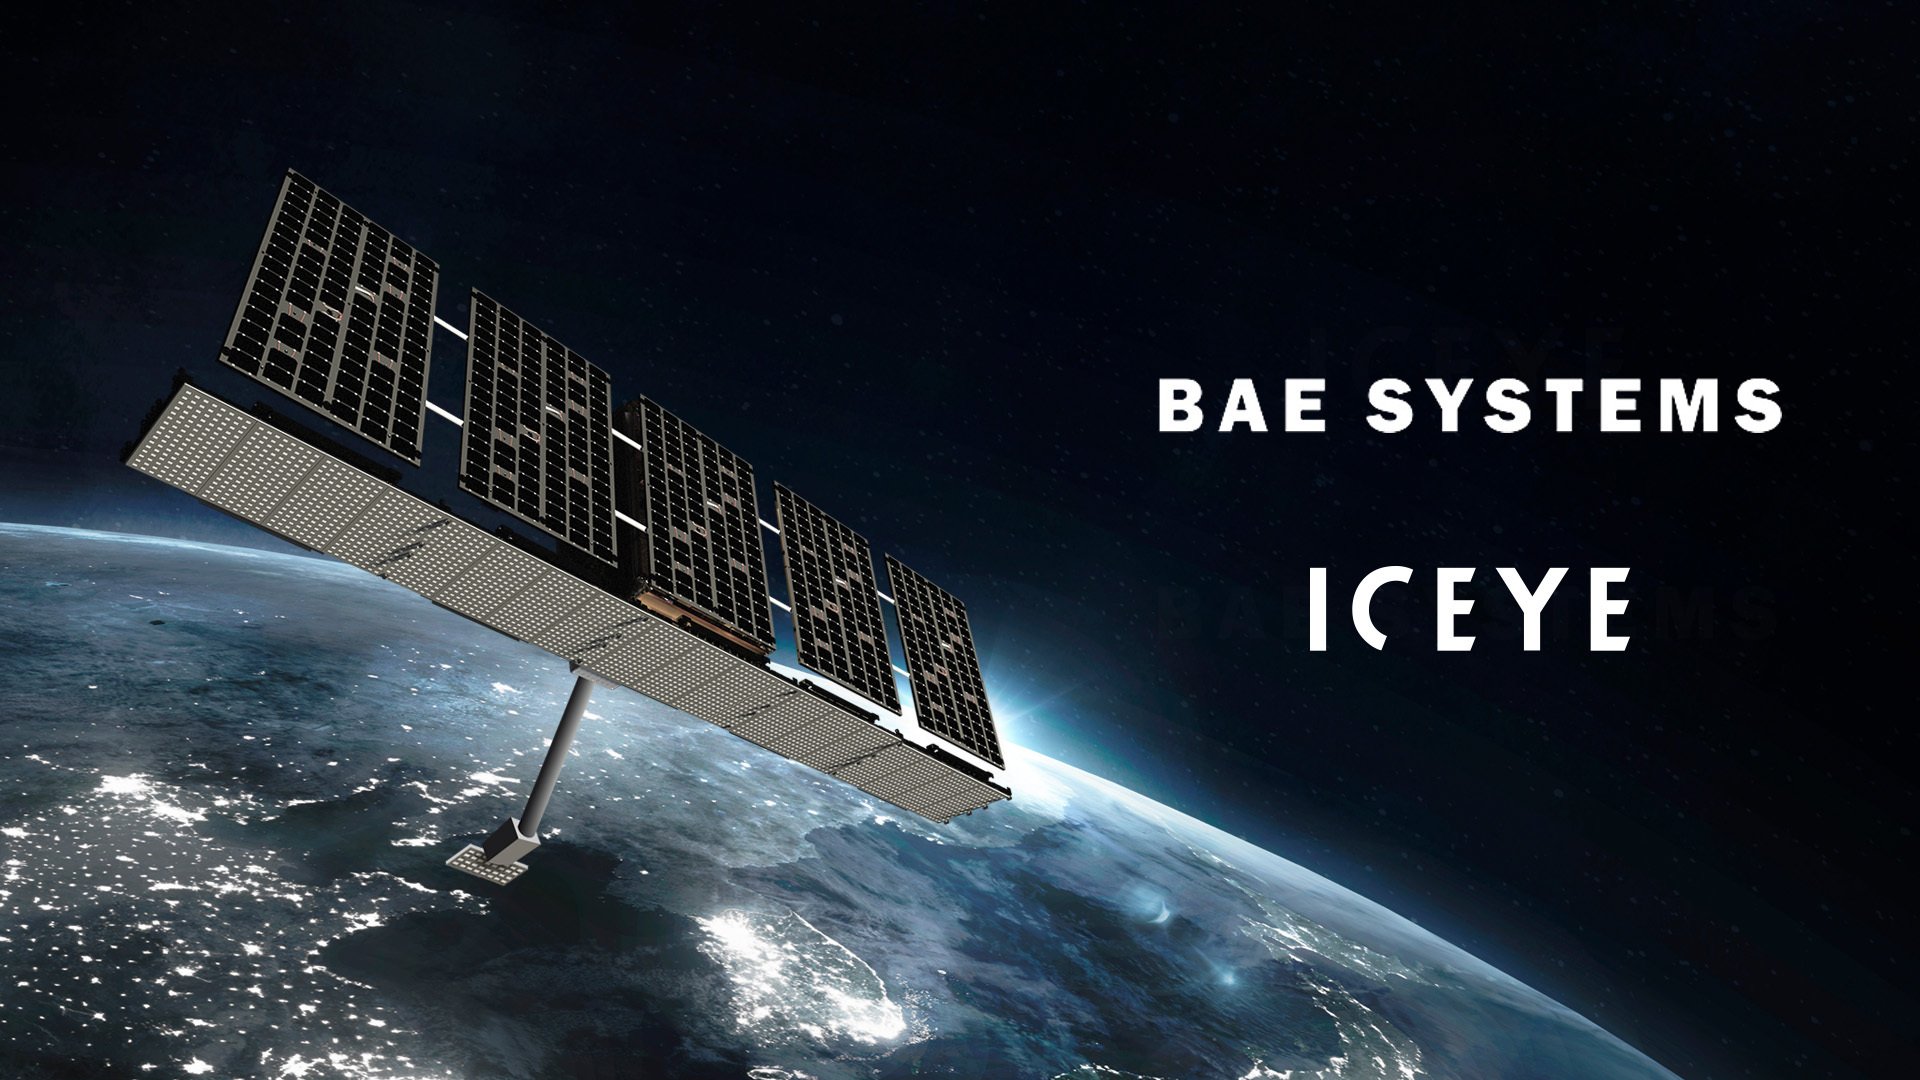 Graphic visualization of an ICEYE SAR satellite with ICEYE and BAE Systems logos.